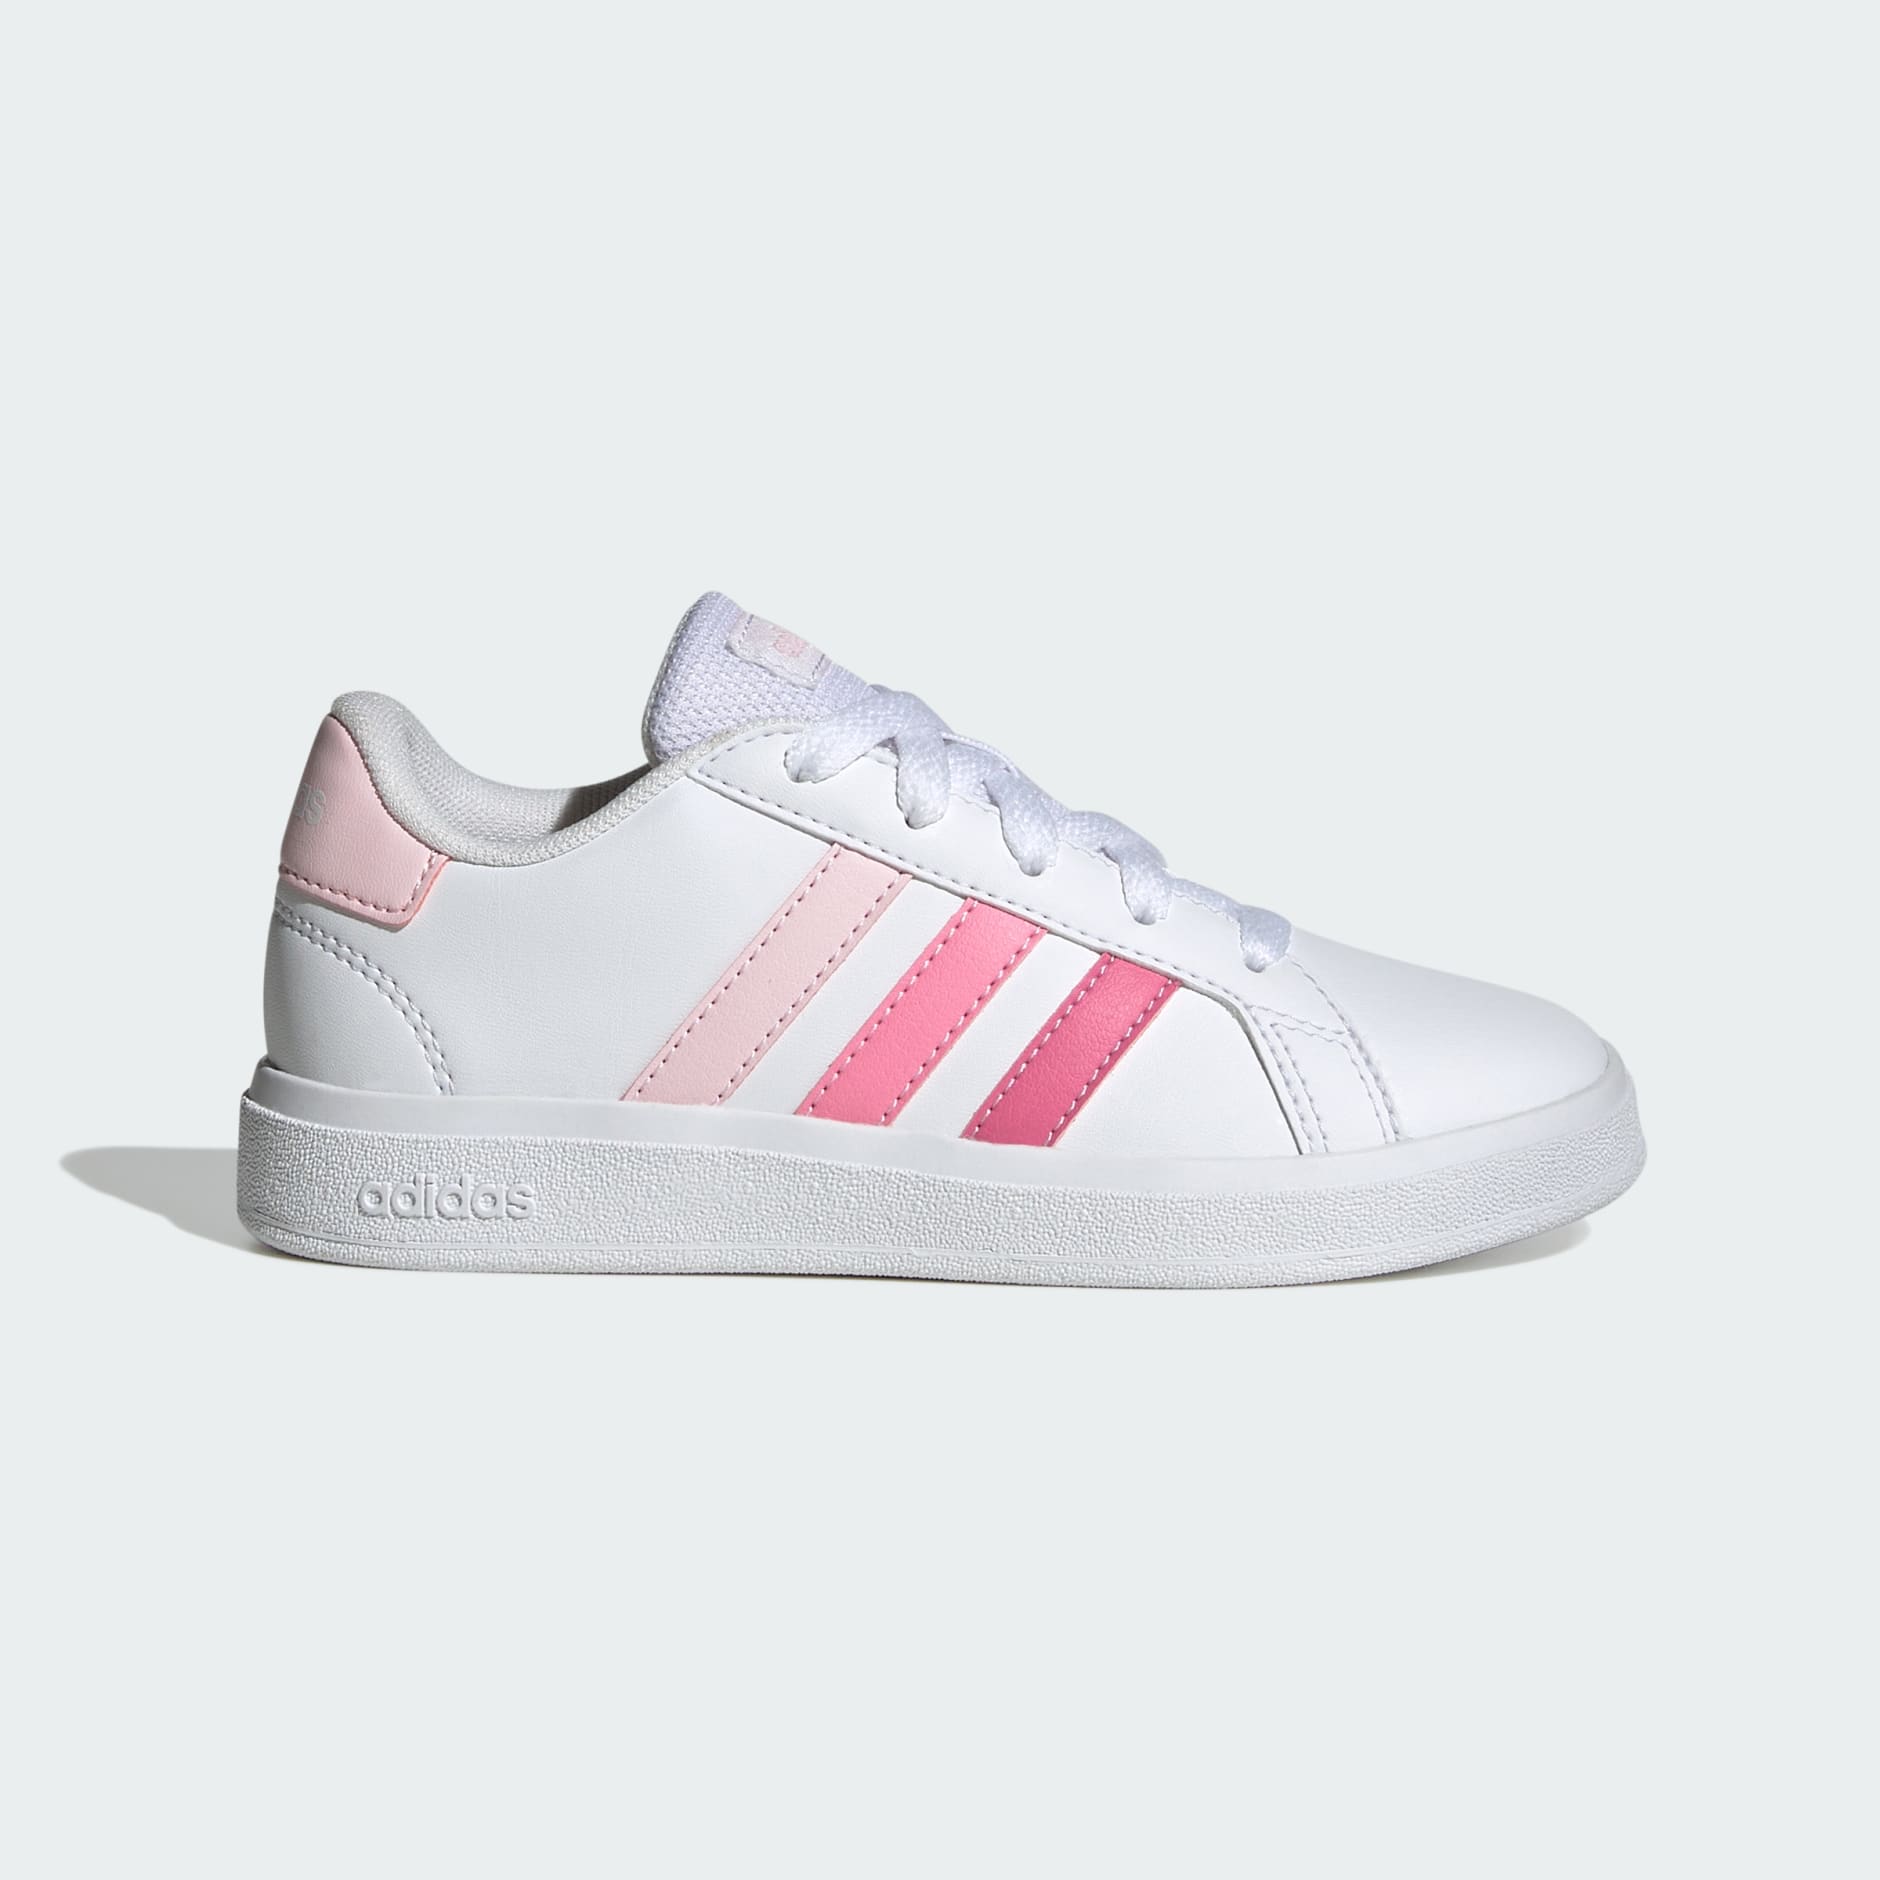 Shoes - Grand Court Lifestyle Tennis Lace-Up Shoes - Pink | adidas ...